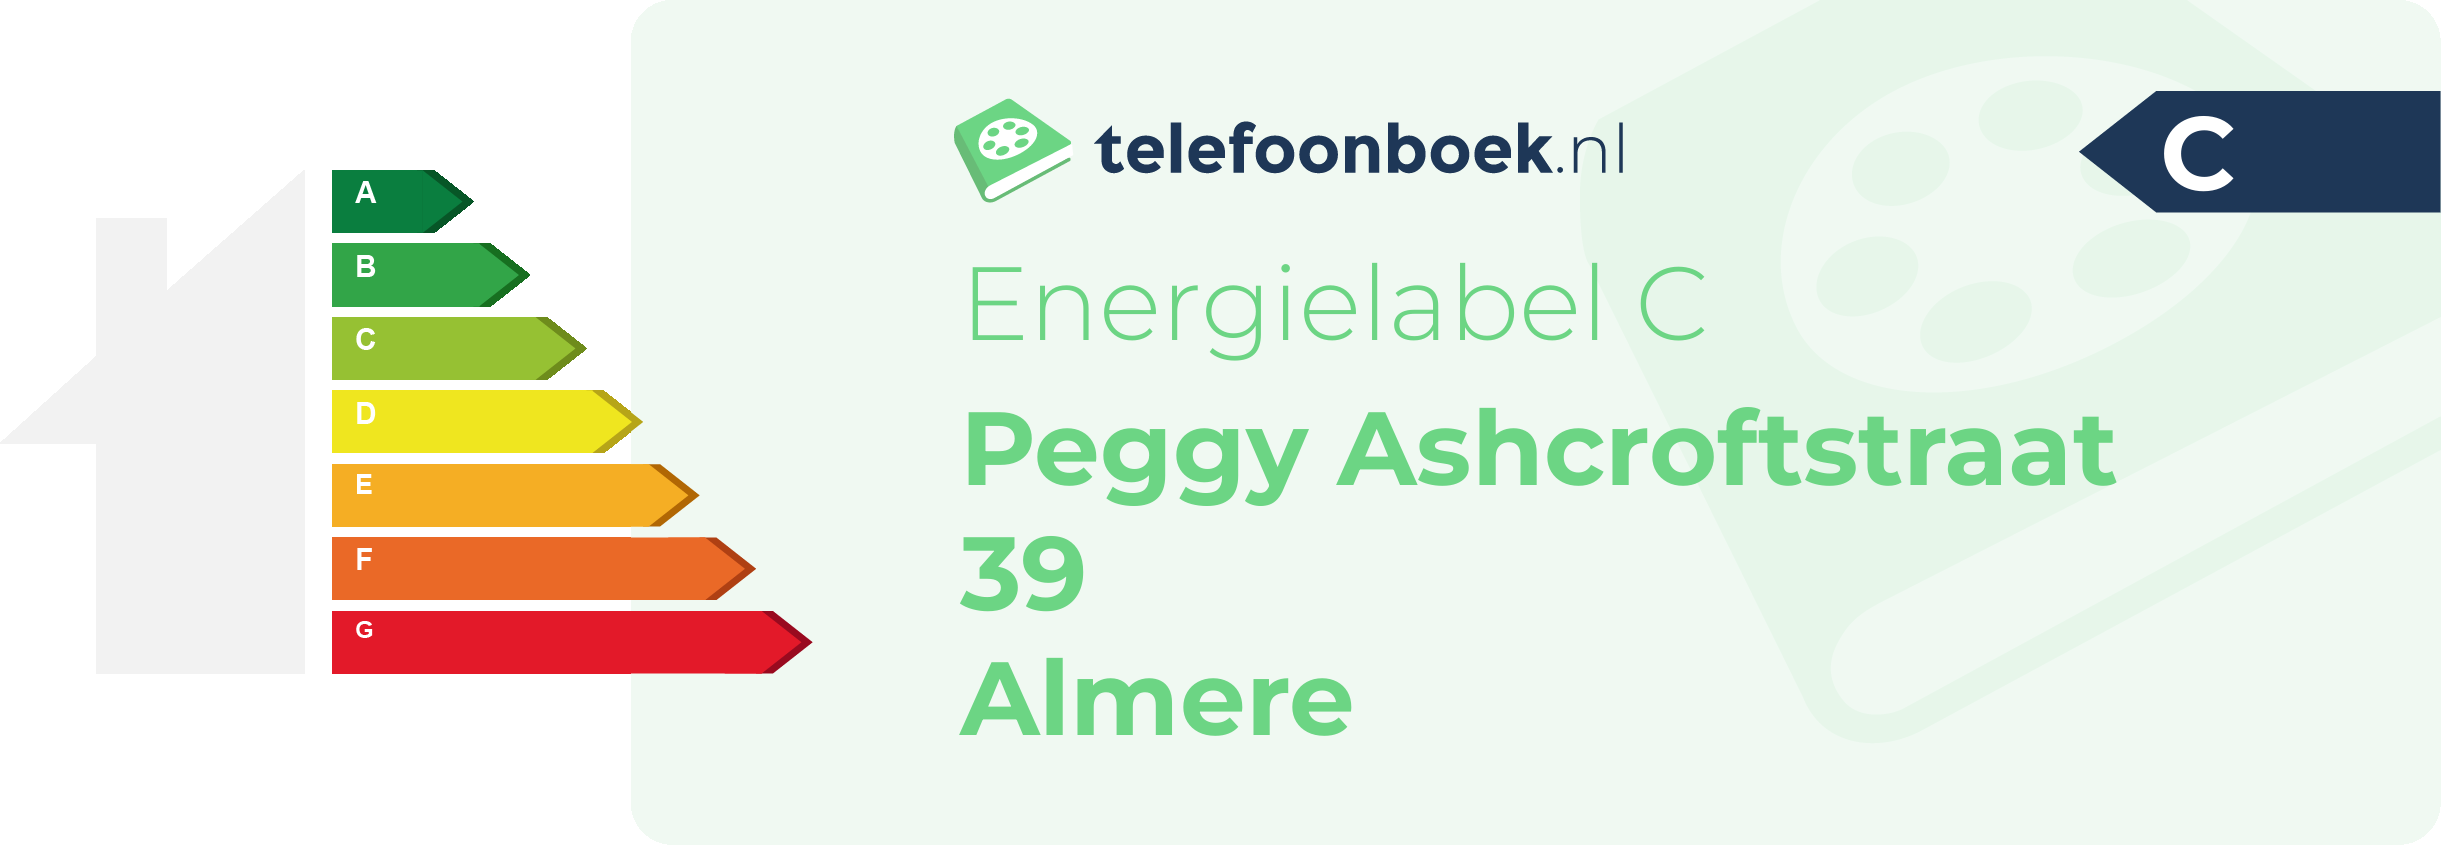 Energielabel Peggy Ashcroftstraat 39 Almere